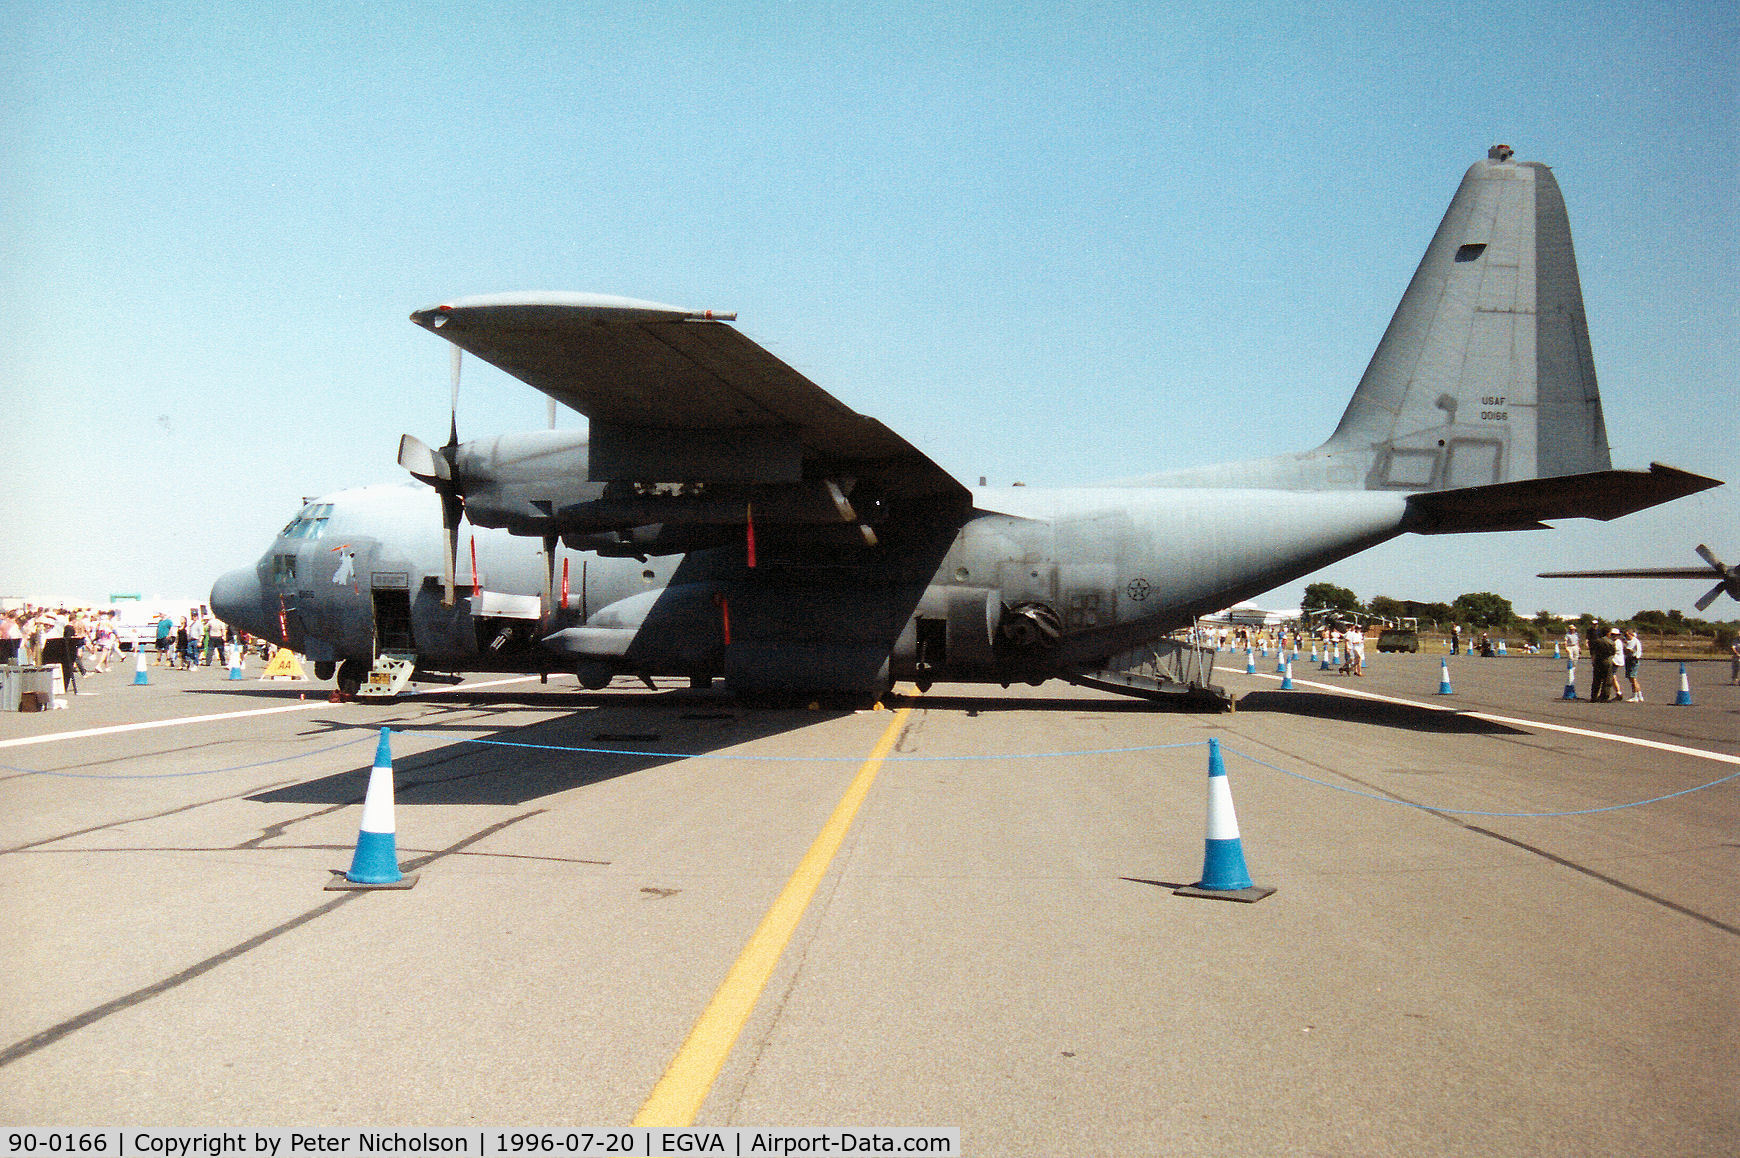 90-0166, 1990 Lockheed AC-130U Spooky II C/N 382-5261, AC-130U Hercules named Hellraiser of the 4th Special Operations Squadron on display at the 1996 Royal Intnl Air Tattoo at RAF Fairford.